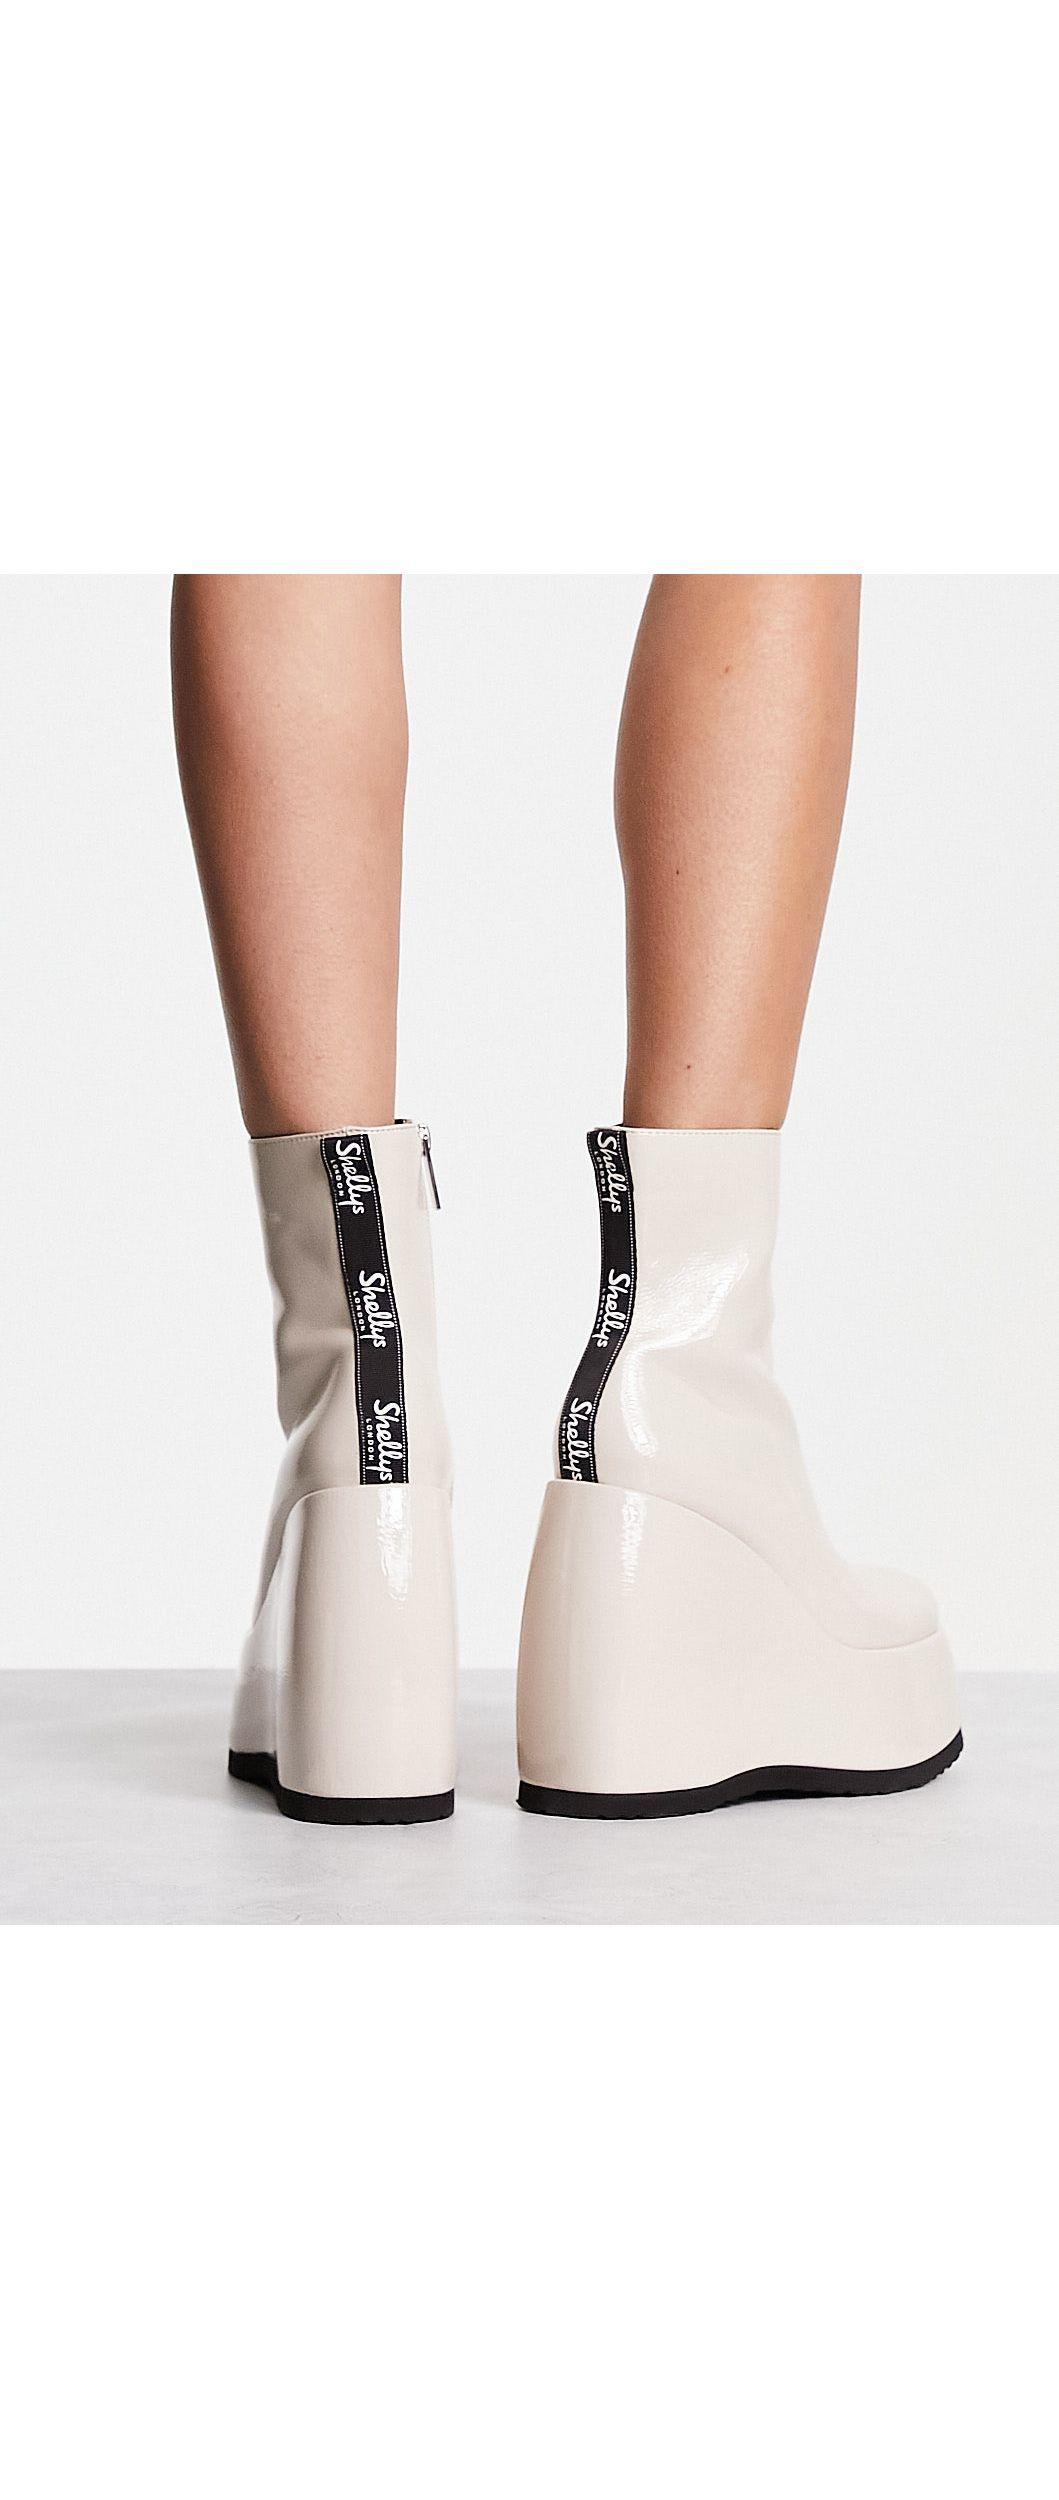 Shellys London Roxanne Wedge Boots in White | Lyst